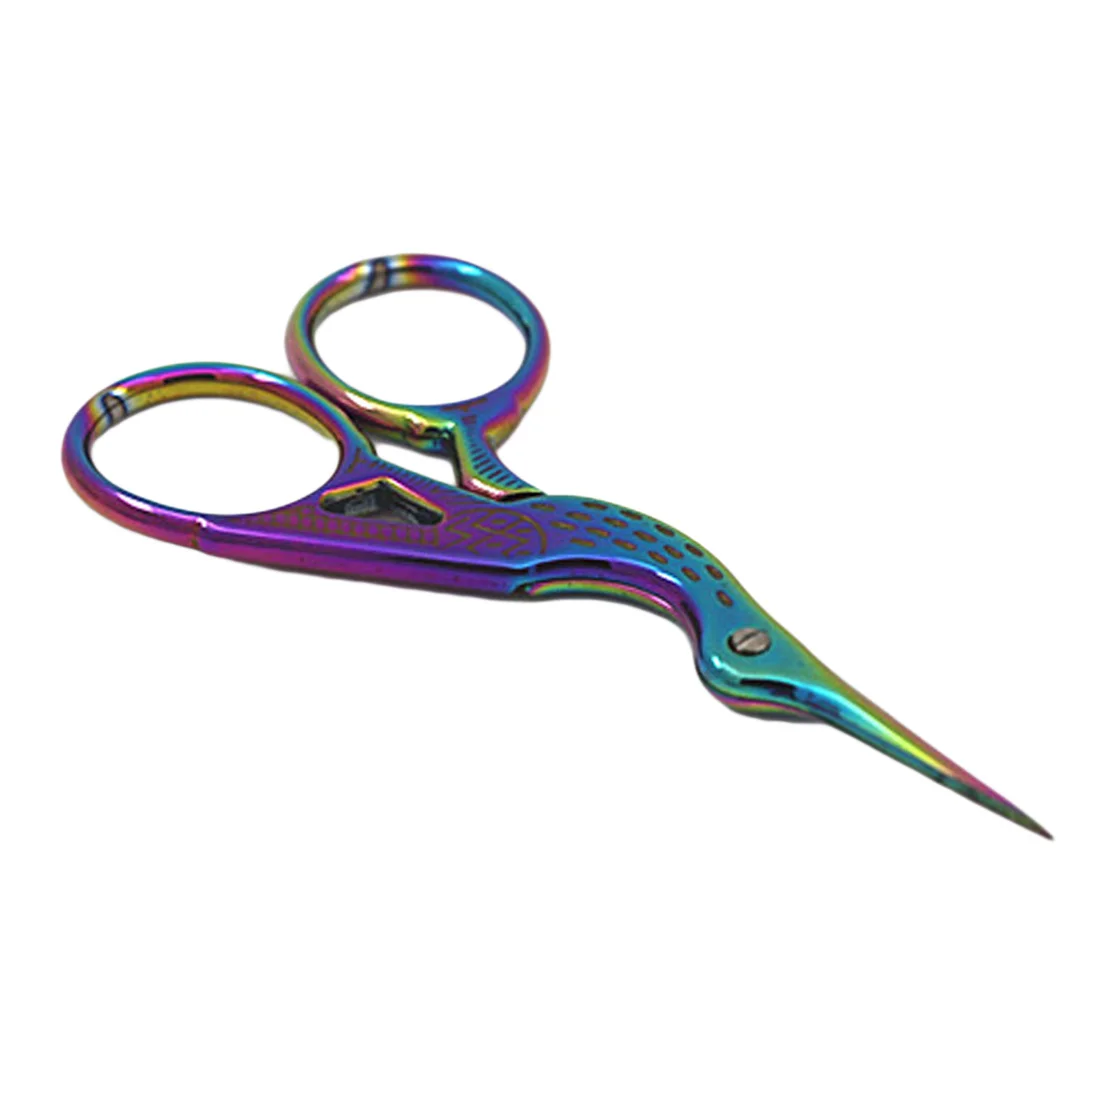 Crochet Manicure Cutter Remover Scissor Nail Cuticle Styling Tool Embroidery Classic Bird Scissors Durable Stainless Steel